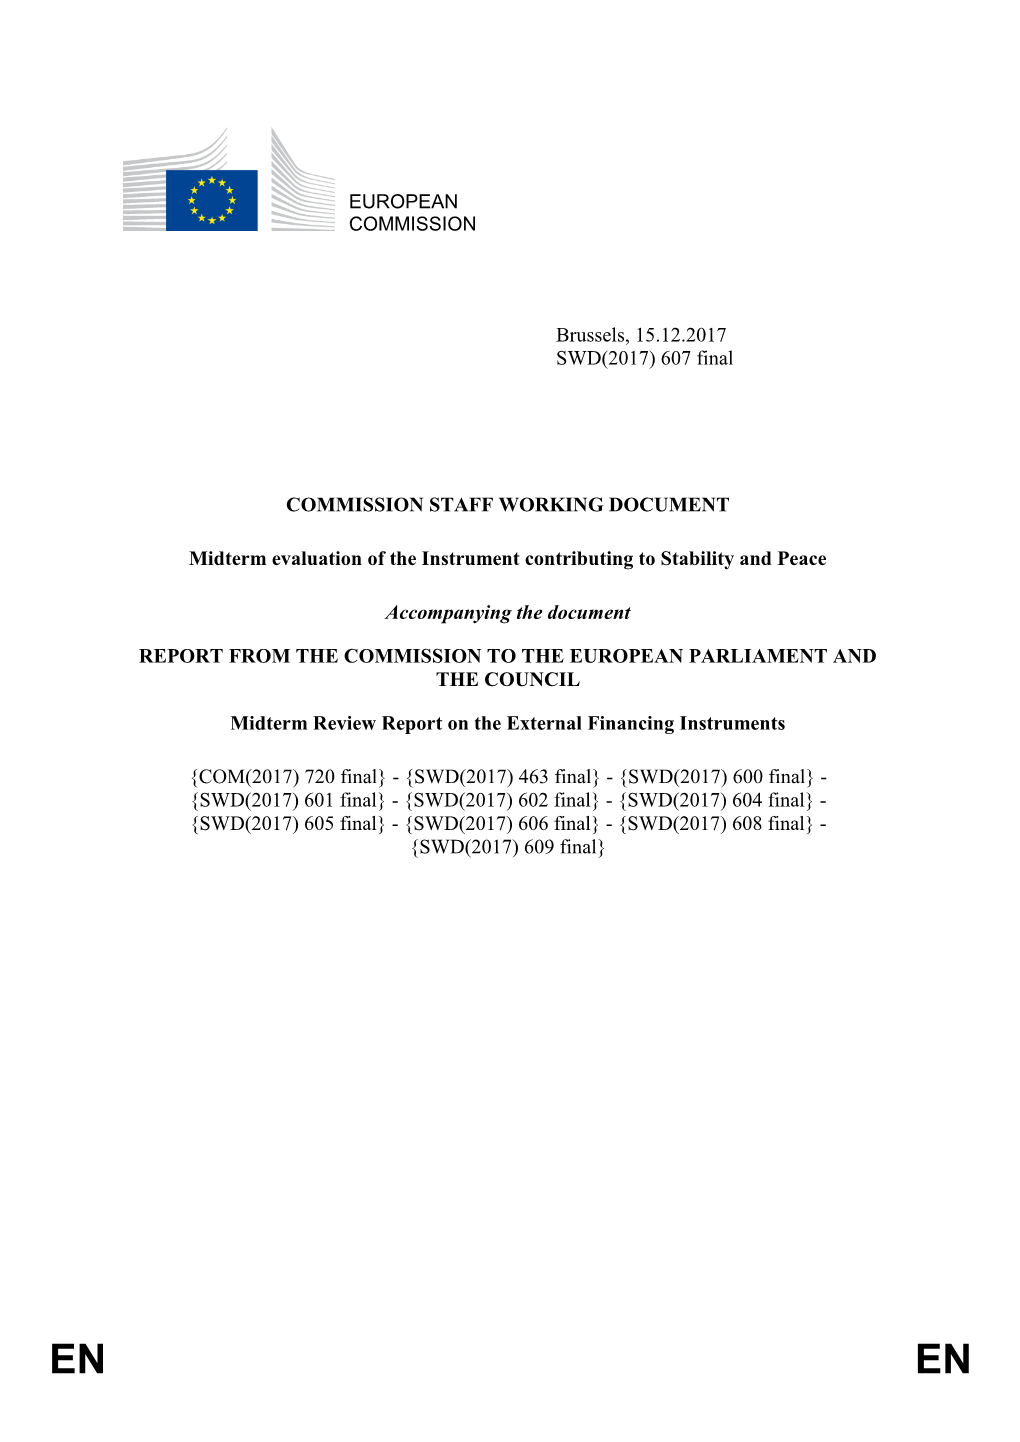 EUROPEAN COMMISSION Brussels, 15.12.2017 SWD(2017) 607 Final COMMISSION STAFF WORKING DOCUMENT Midterm Evaluation of the Instru